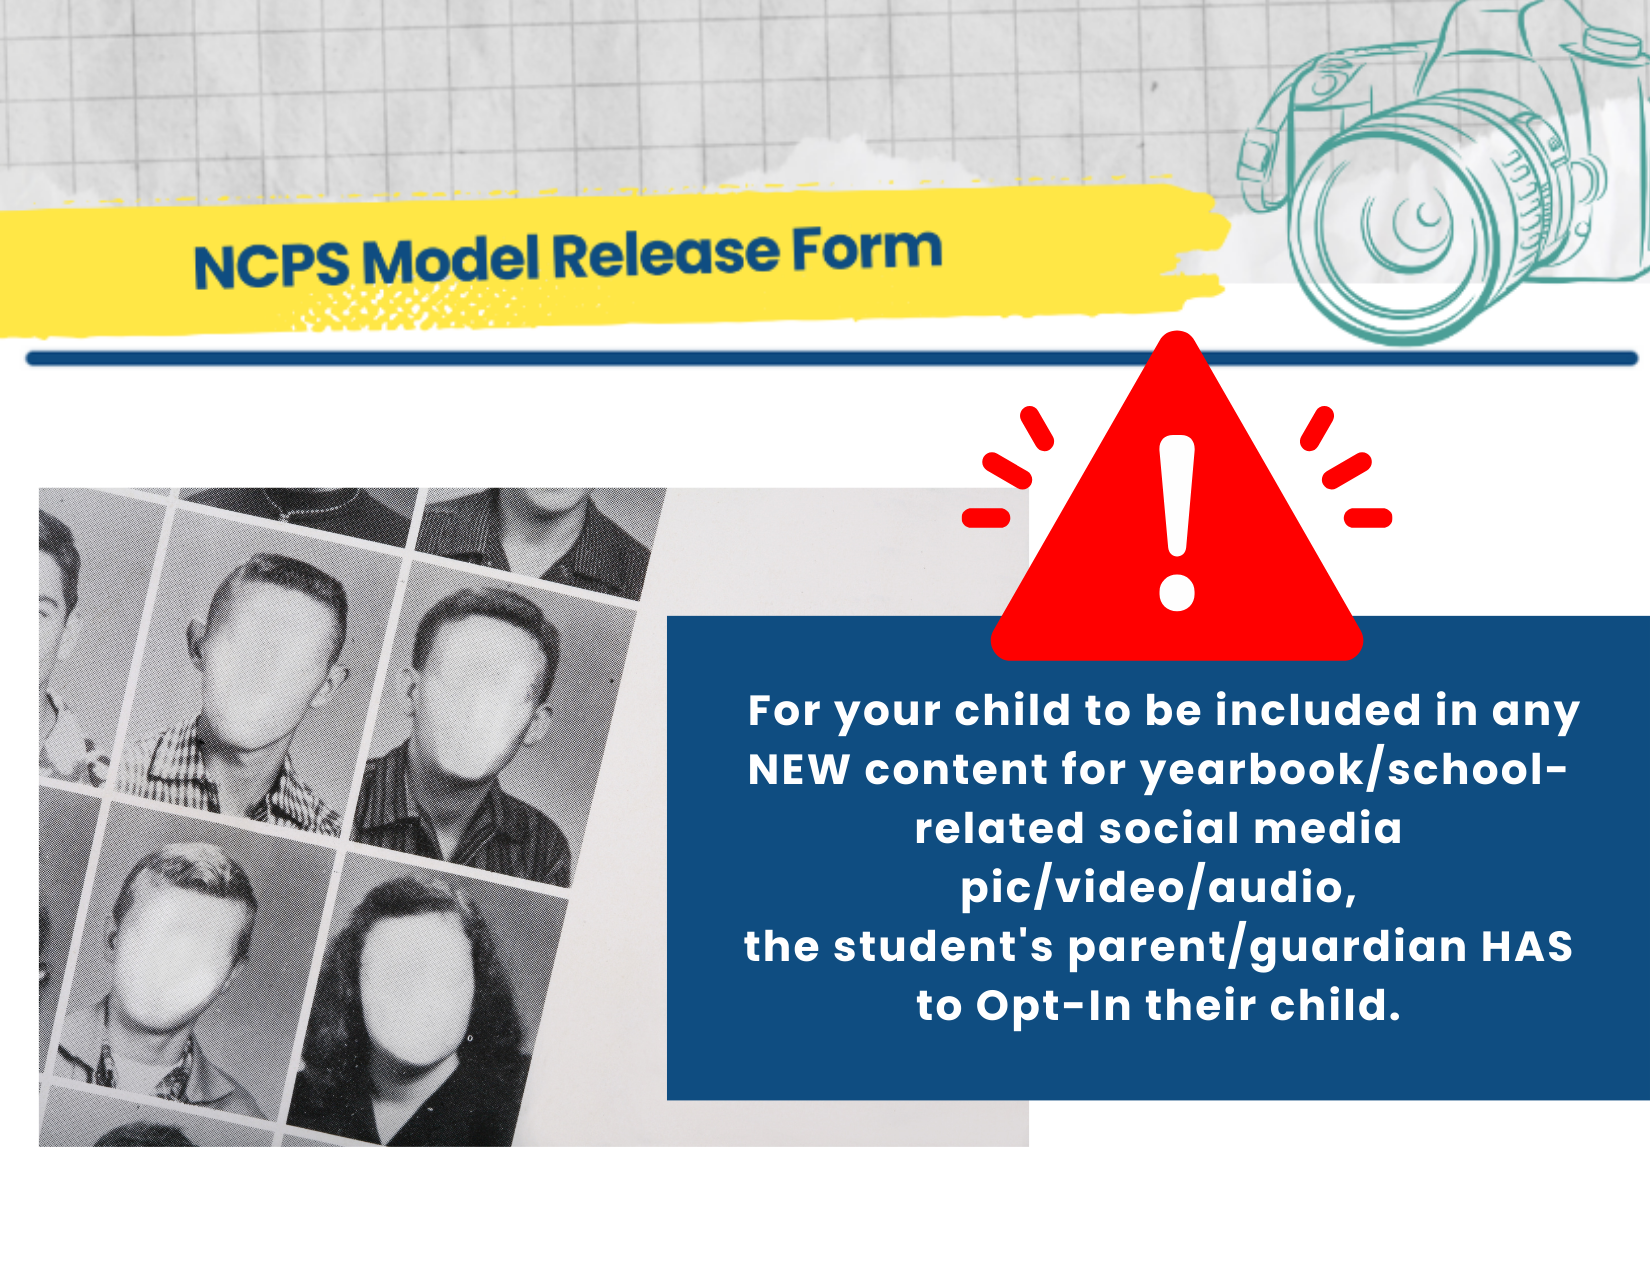 NCPS Model Release Form